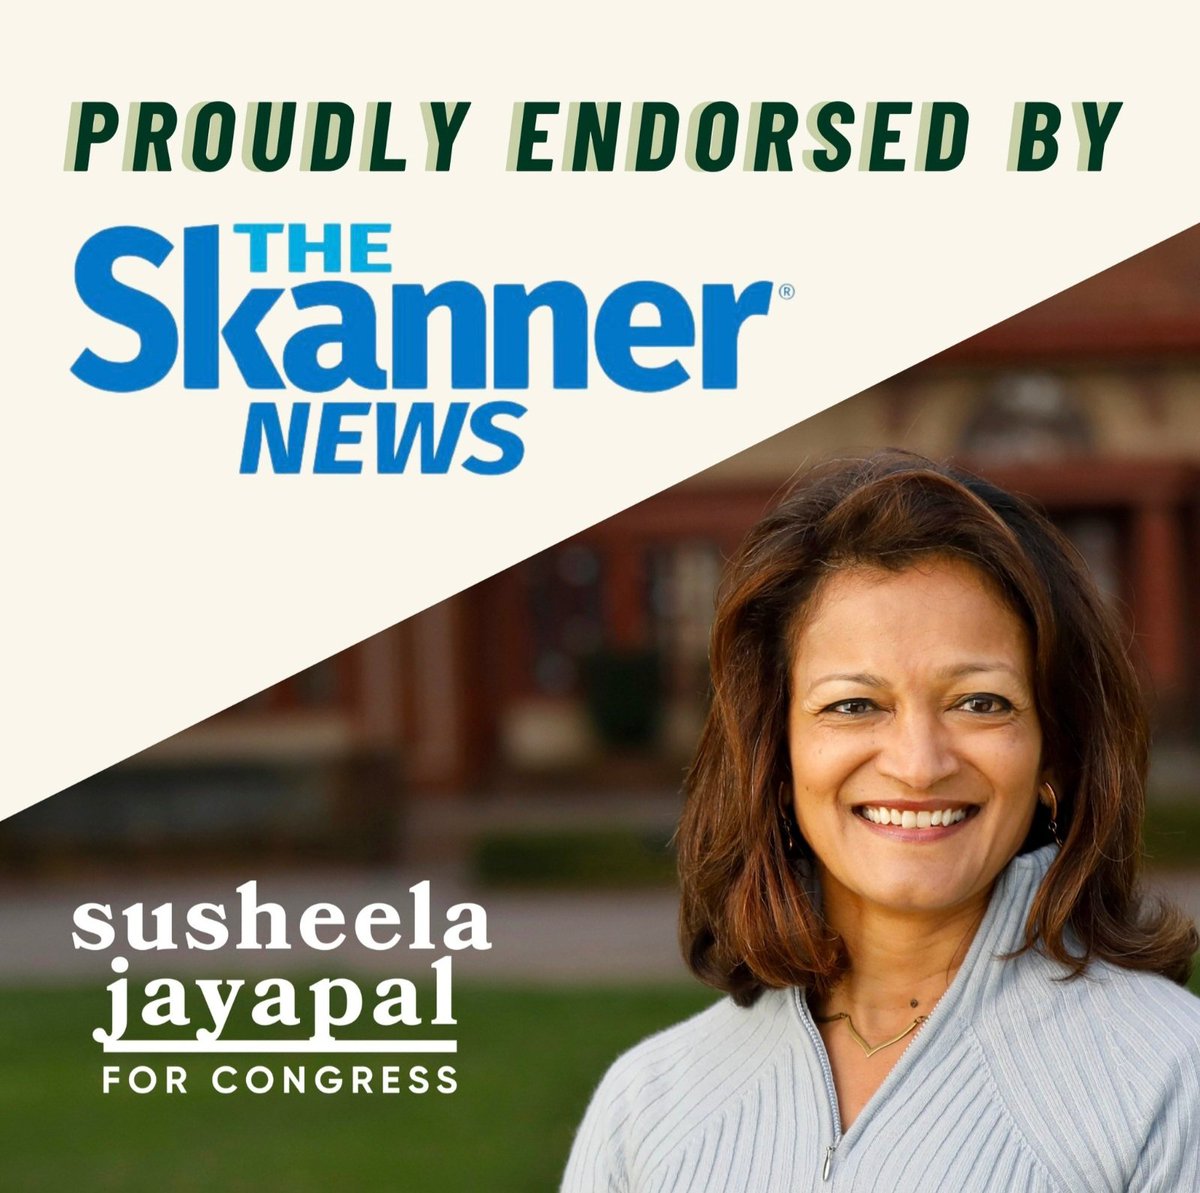 Another great Endorsement For 0R-03's Democratic Candidate Susheela Jayapal susheelaforcongress.com!!!  Susheela is the Candidate we can trust to fight for our Rights and reject corporate and foreign influence.  Let's help her win!
#DemVoice1. #VoteBIGBlue. #ProudBlue